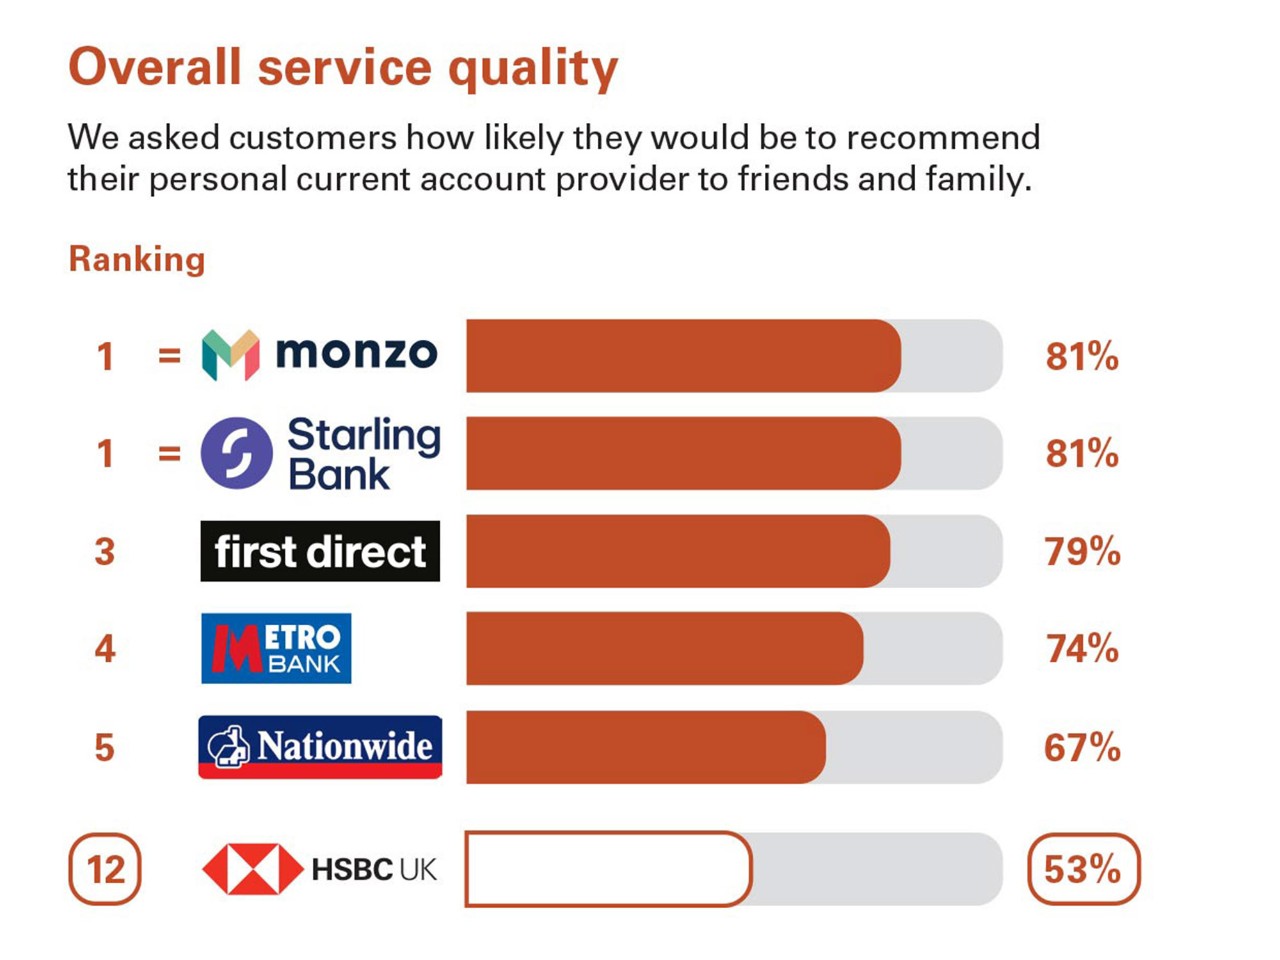 Overall Service Quality. We asked customers how likely they would be to recommend their personal current account provider to friends and family. Ranking: equal 1 Monzo 81% equal 1 Starling Bank 81% 3 first direct 79% 4 Metro Bank 74% 5 Nationwide 67% 12 HSBC UK 53%.